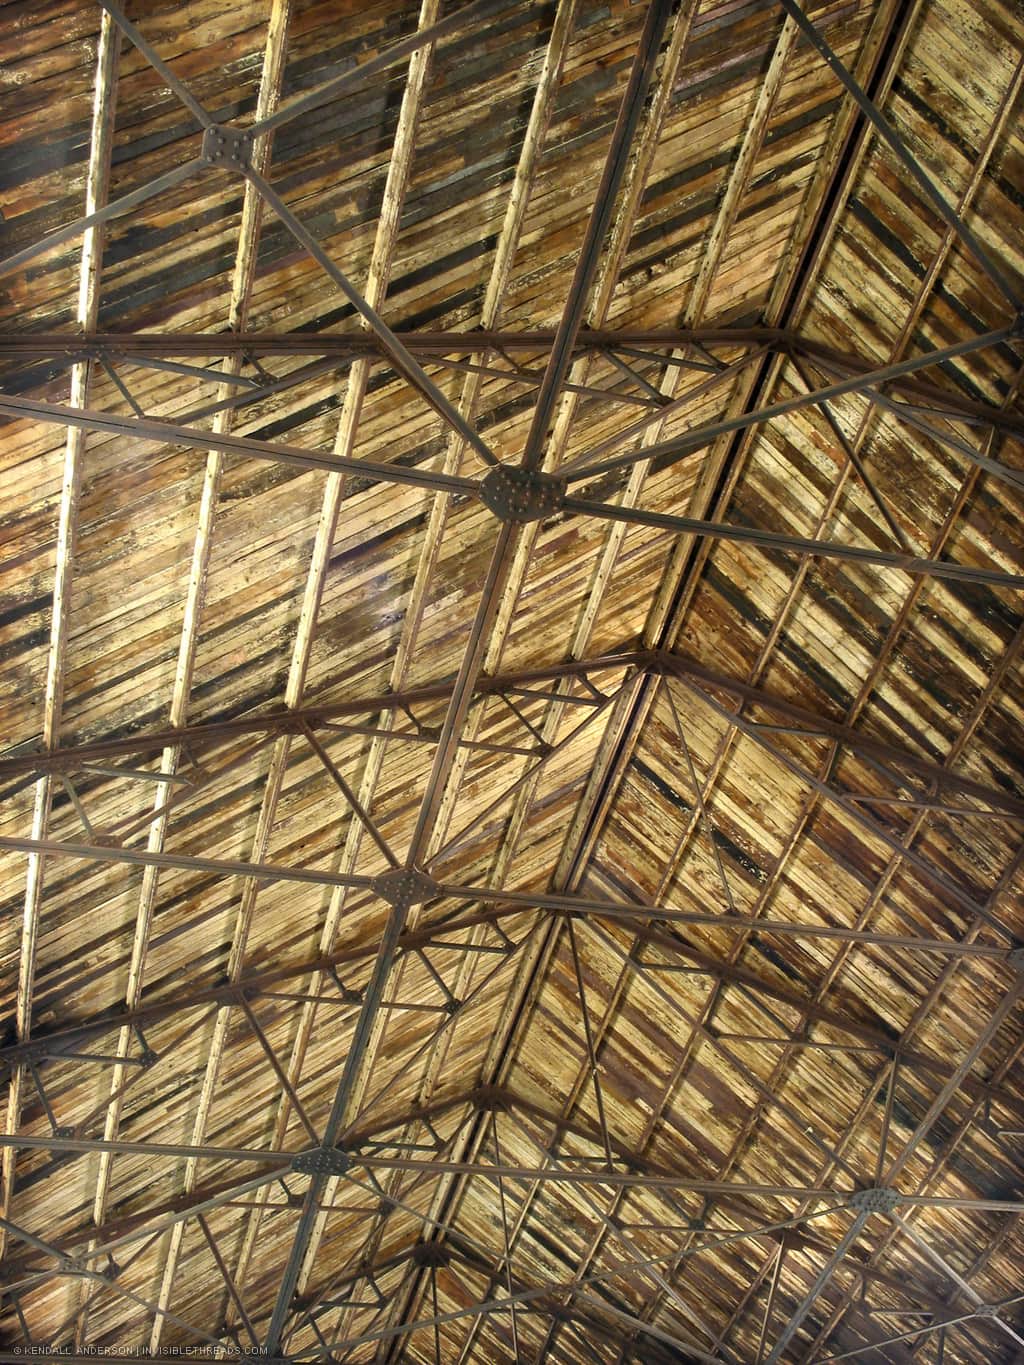 Underside of an industrial warehouse ceiling, with steel trusses supporting a wood slat roof